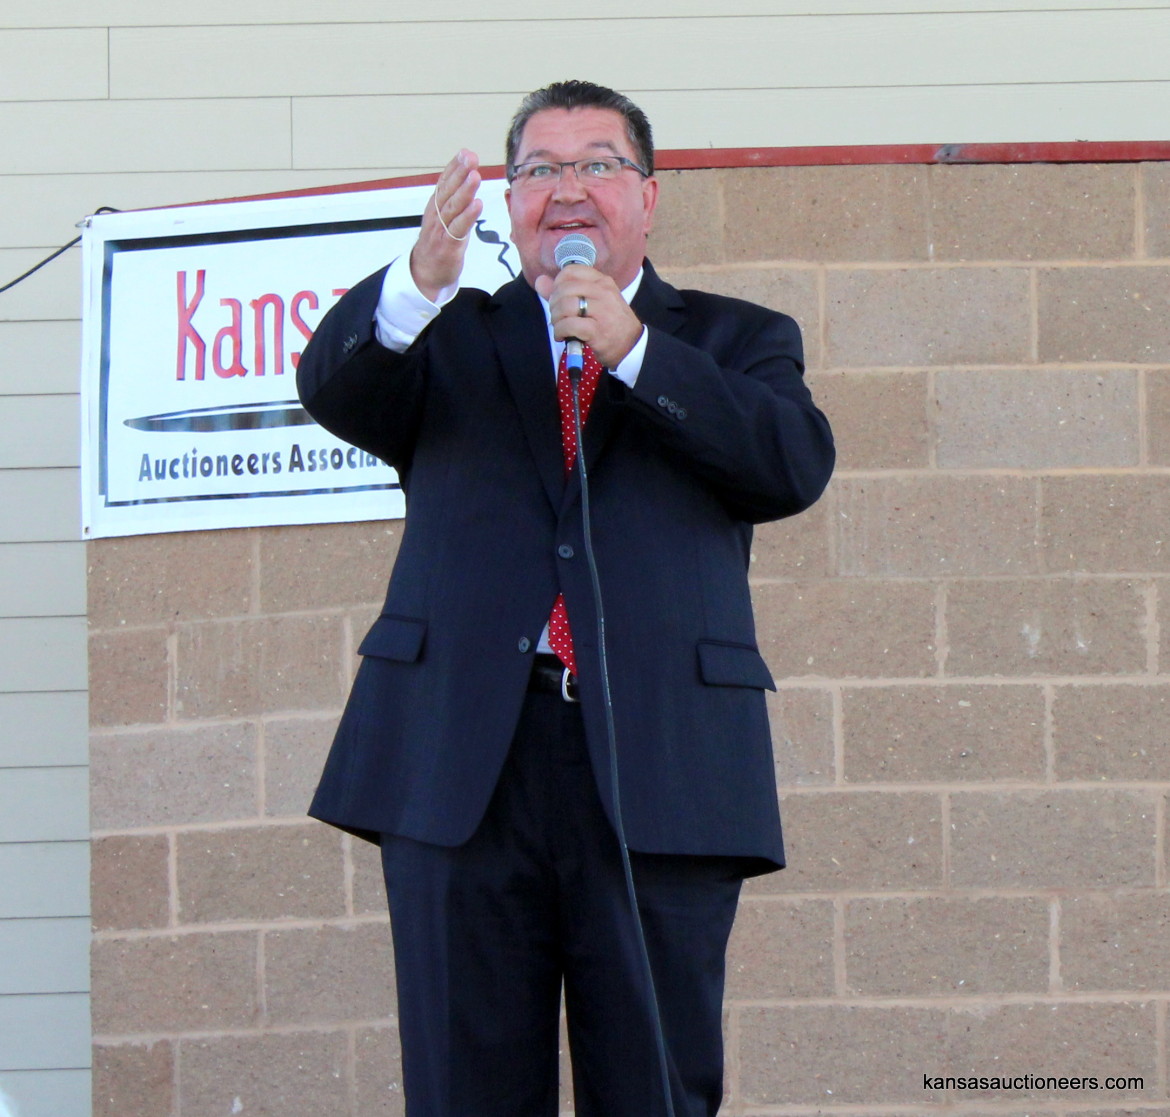 Lenny Mullin competing in the 2015 Kansas Auctioneer finals.